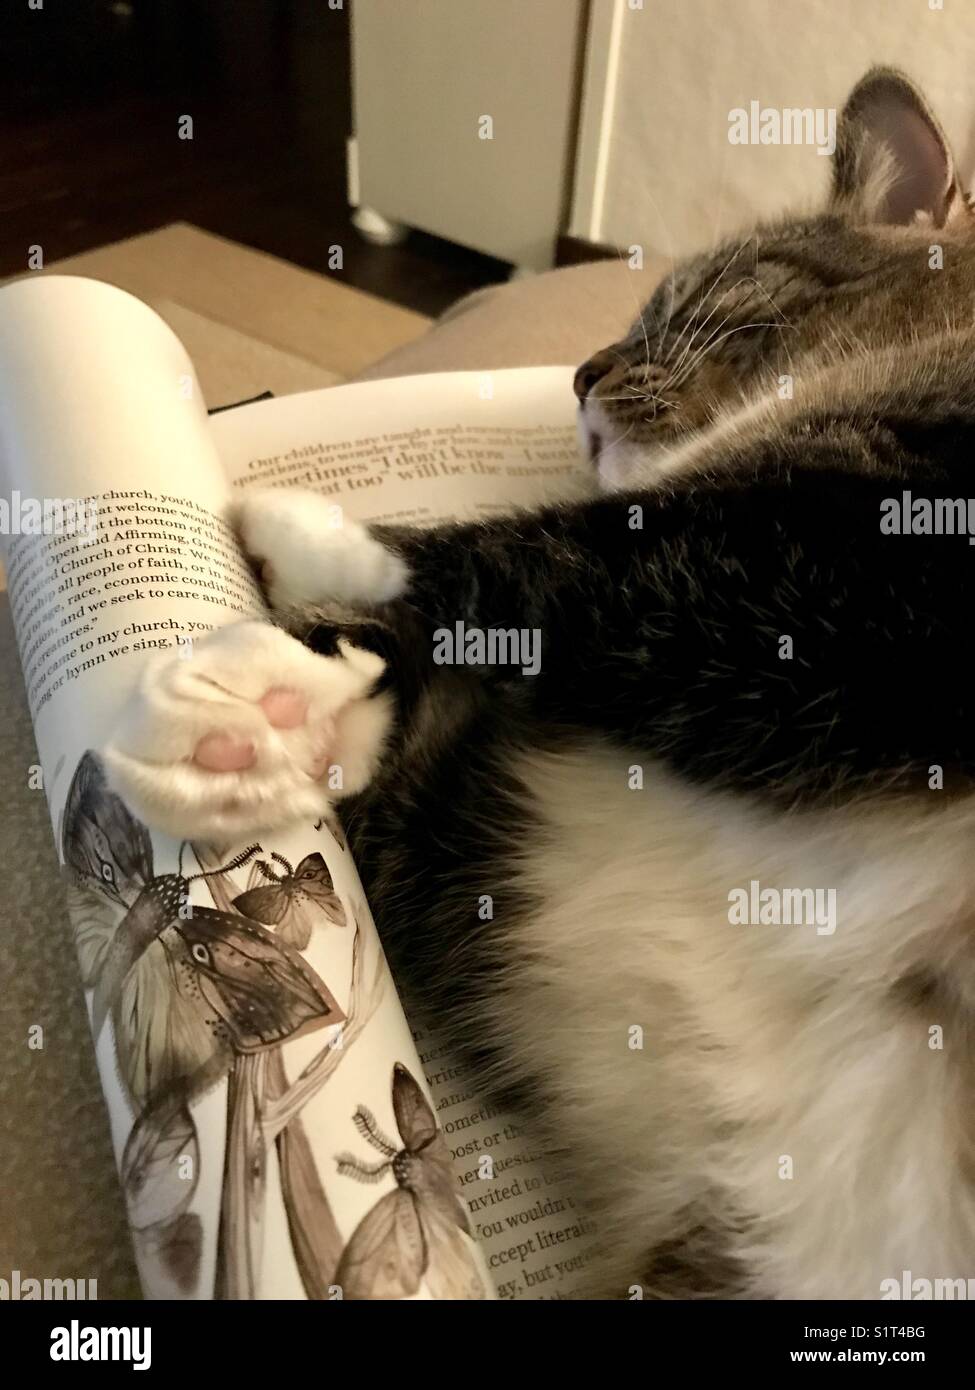 Daphne our cat, sleeping, on a magazine. Stock Photo